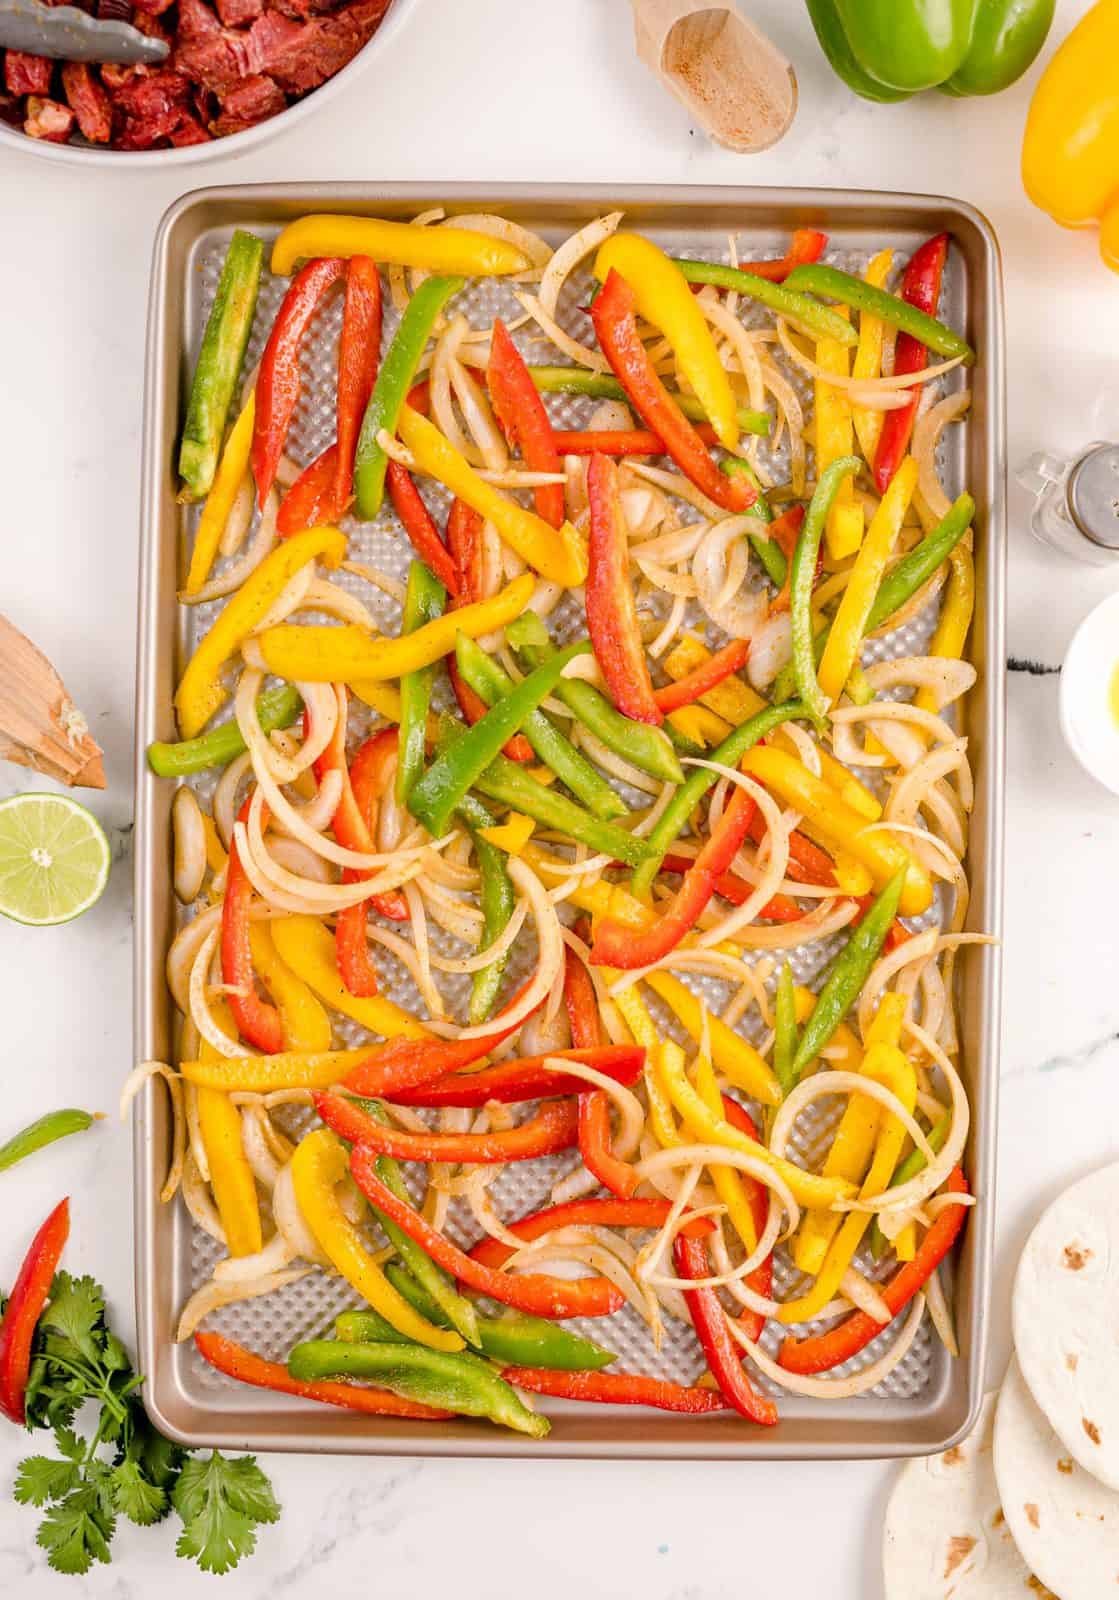 Vegetables spread out over sheet pan.